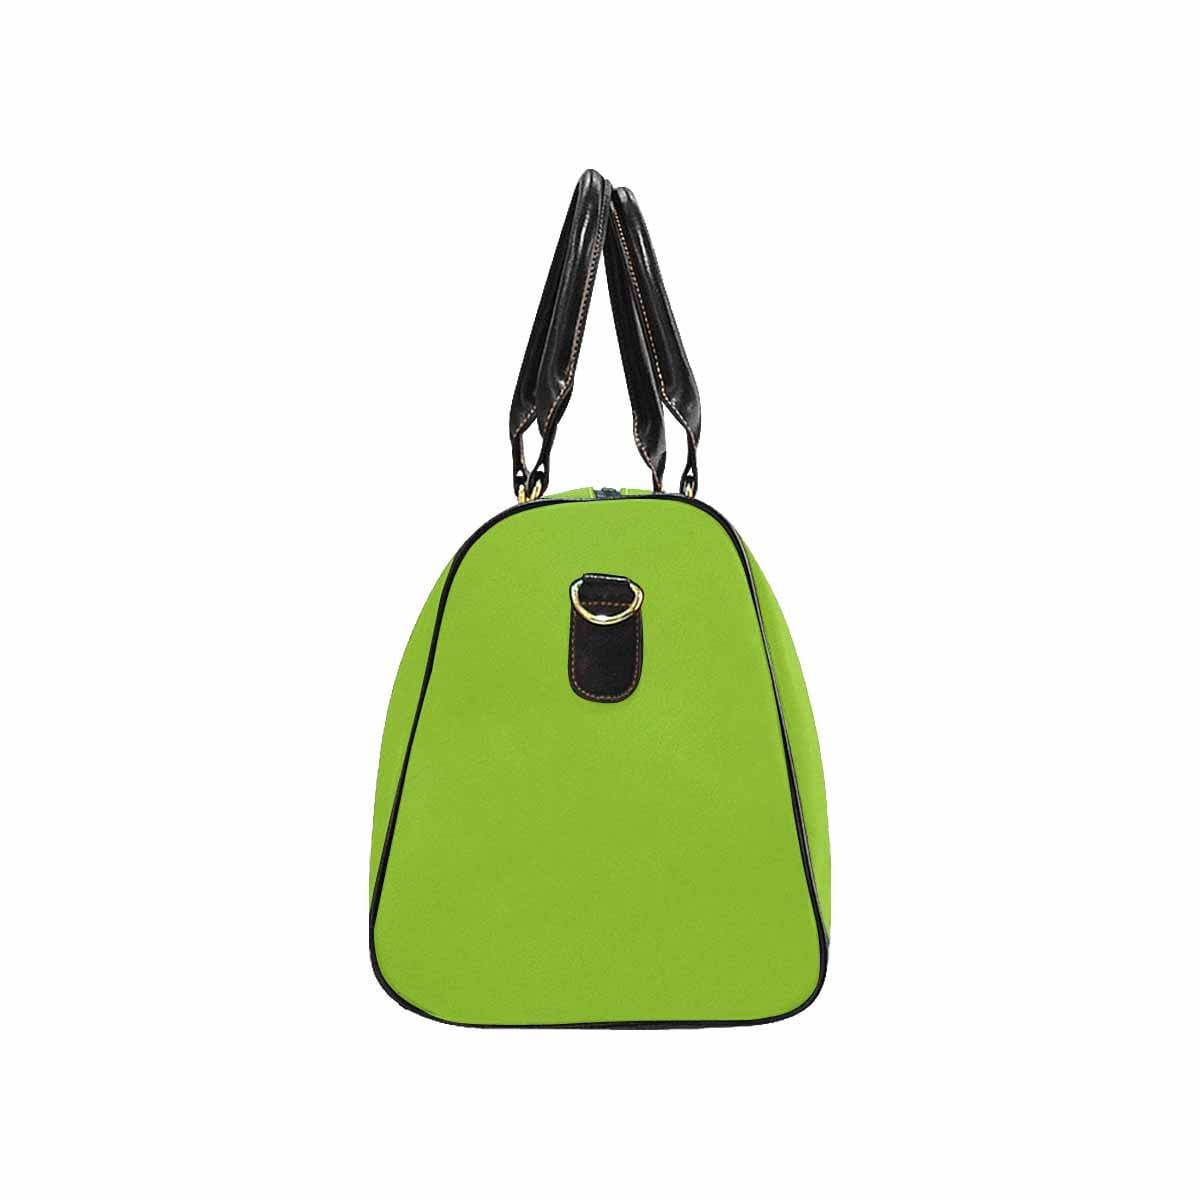 Travel Bag Leather Carry On Large Luggage Bag Yellow Green - Bags | Travel Bags